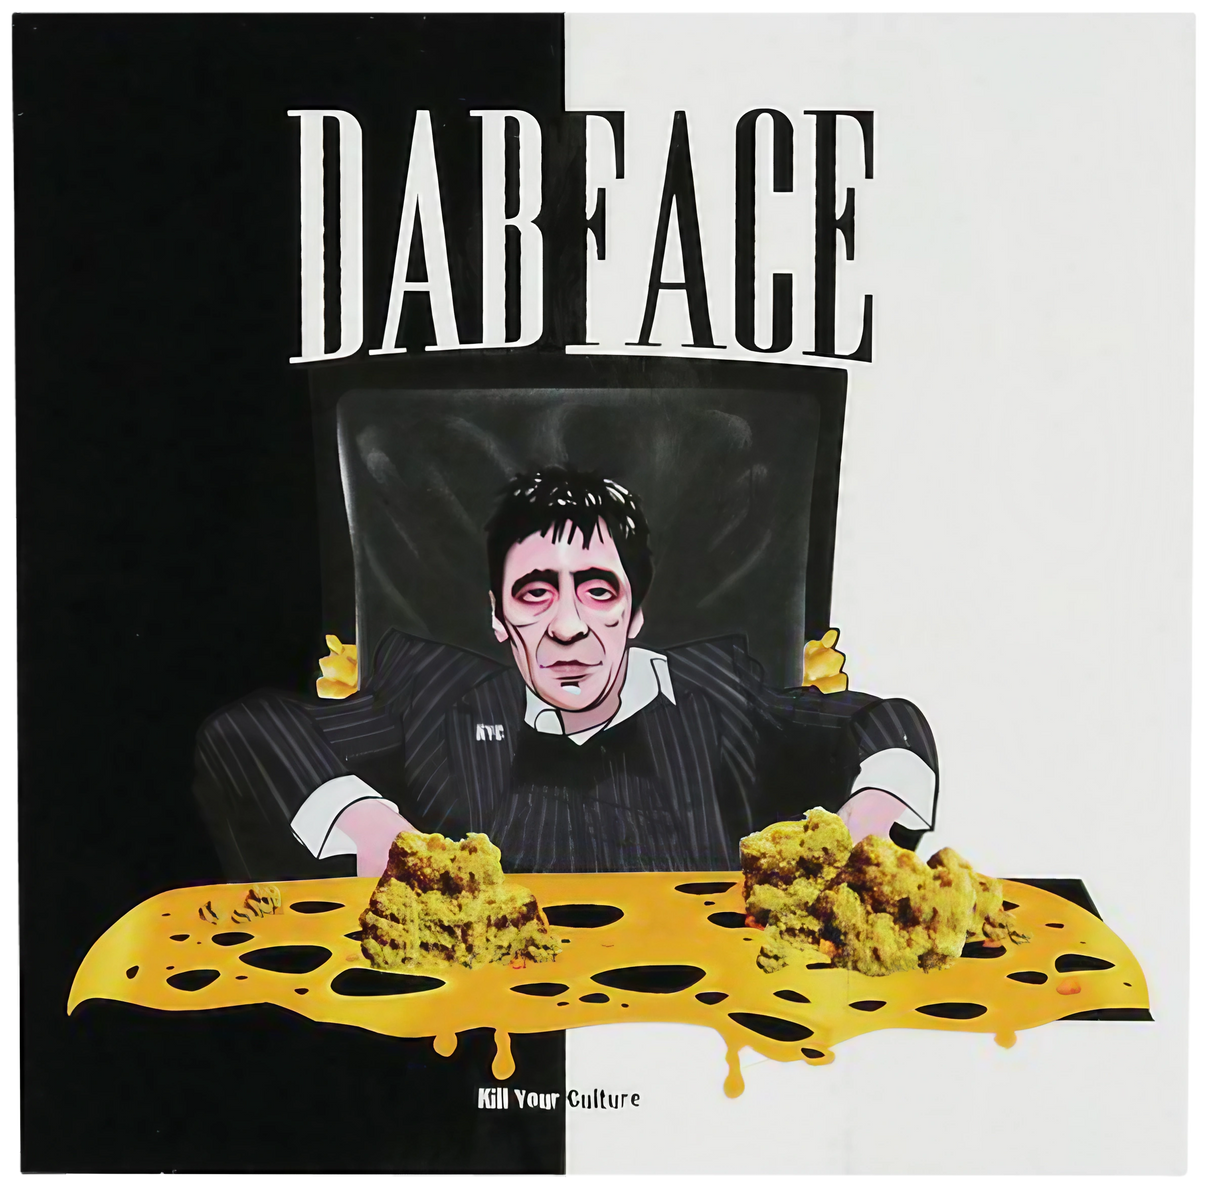 Dabface Vinyl Sticker featuring caricature over honey-like substance, size 4.5" x 4.5", front view